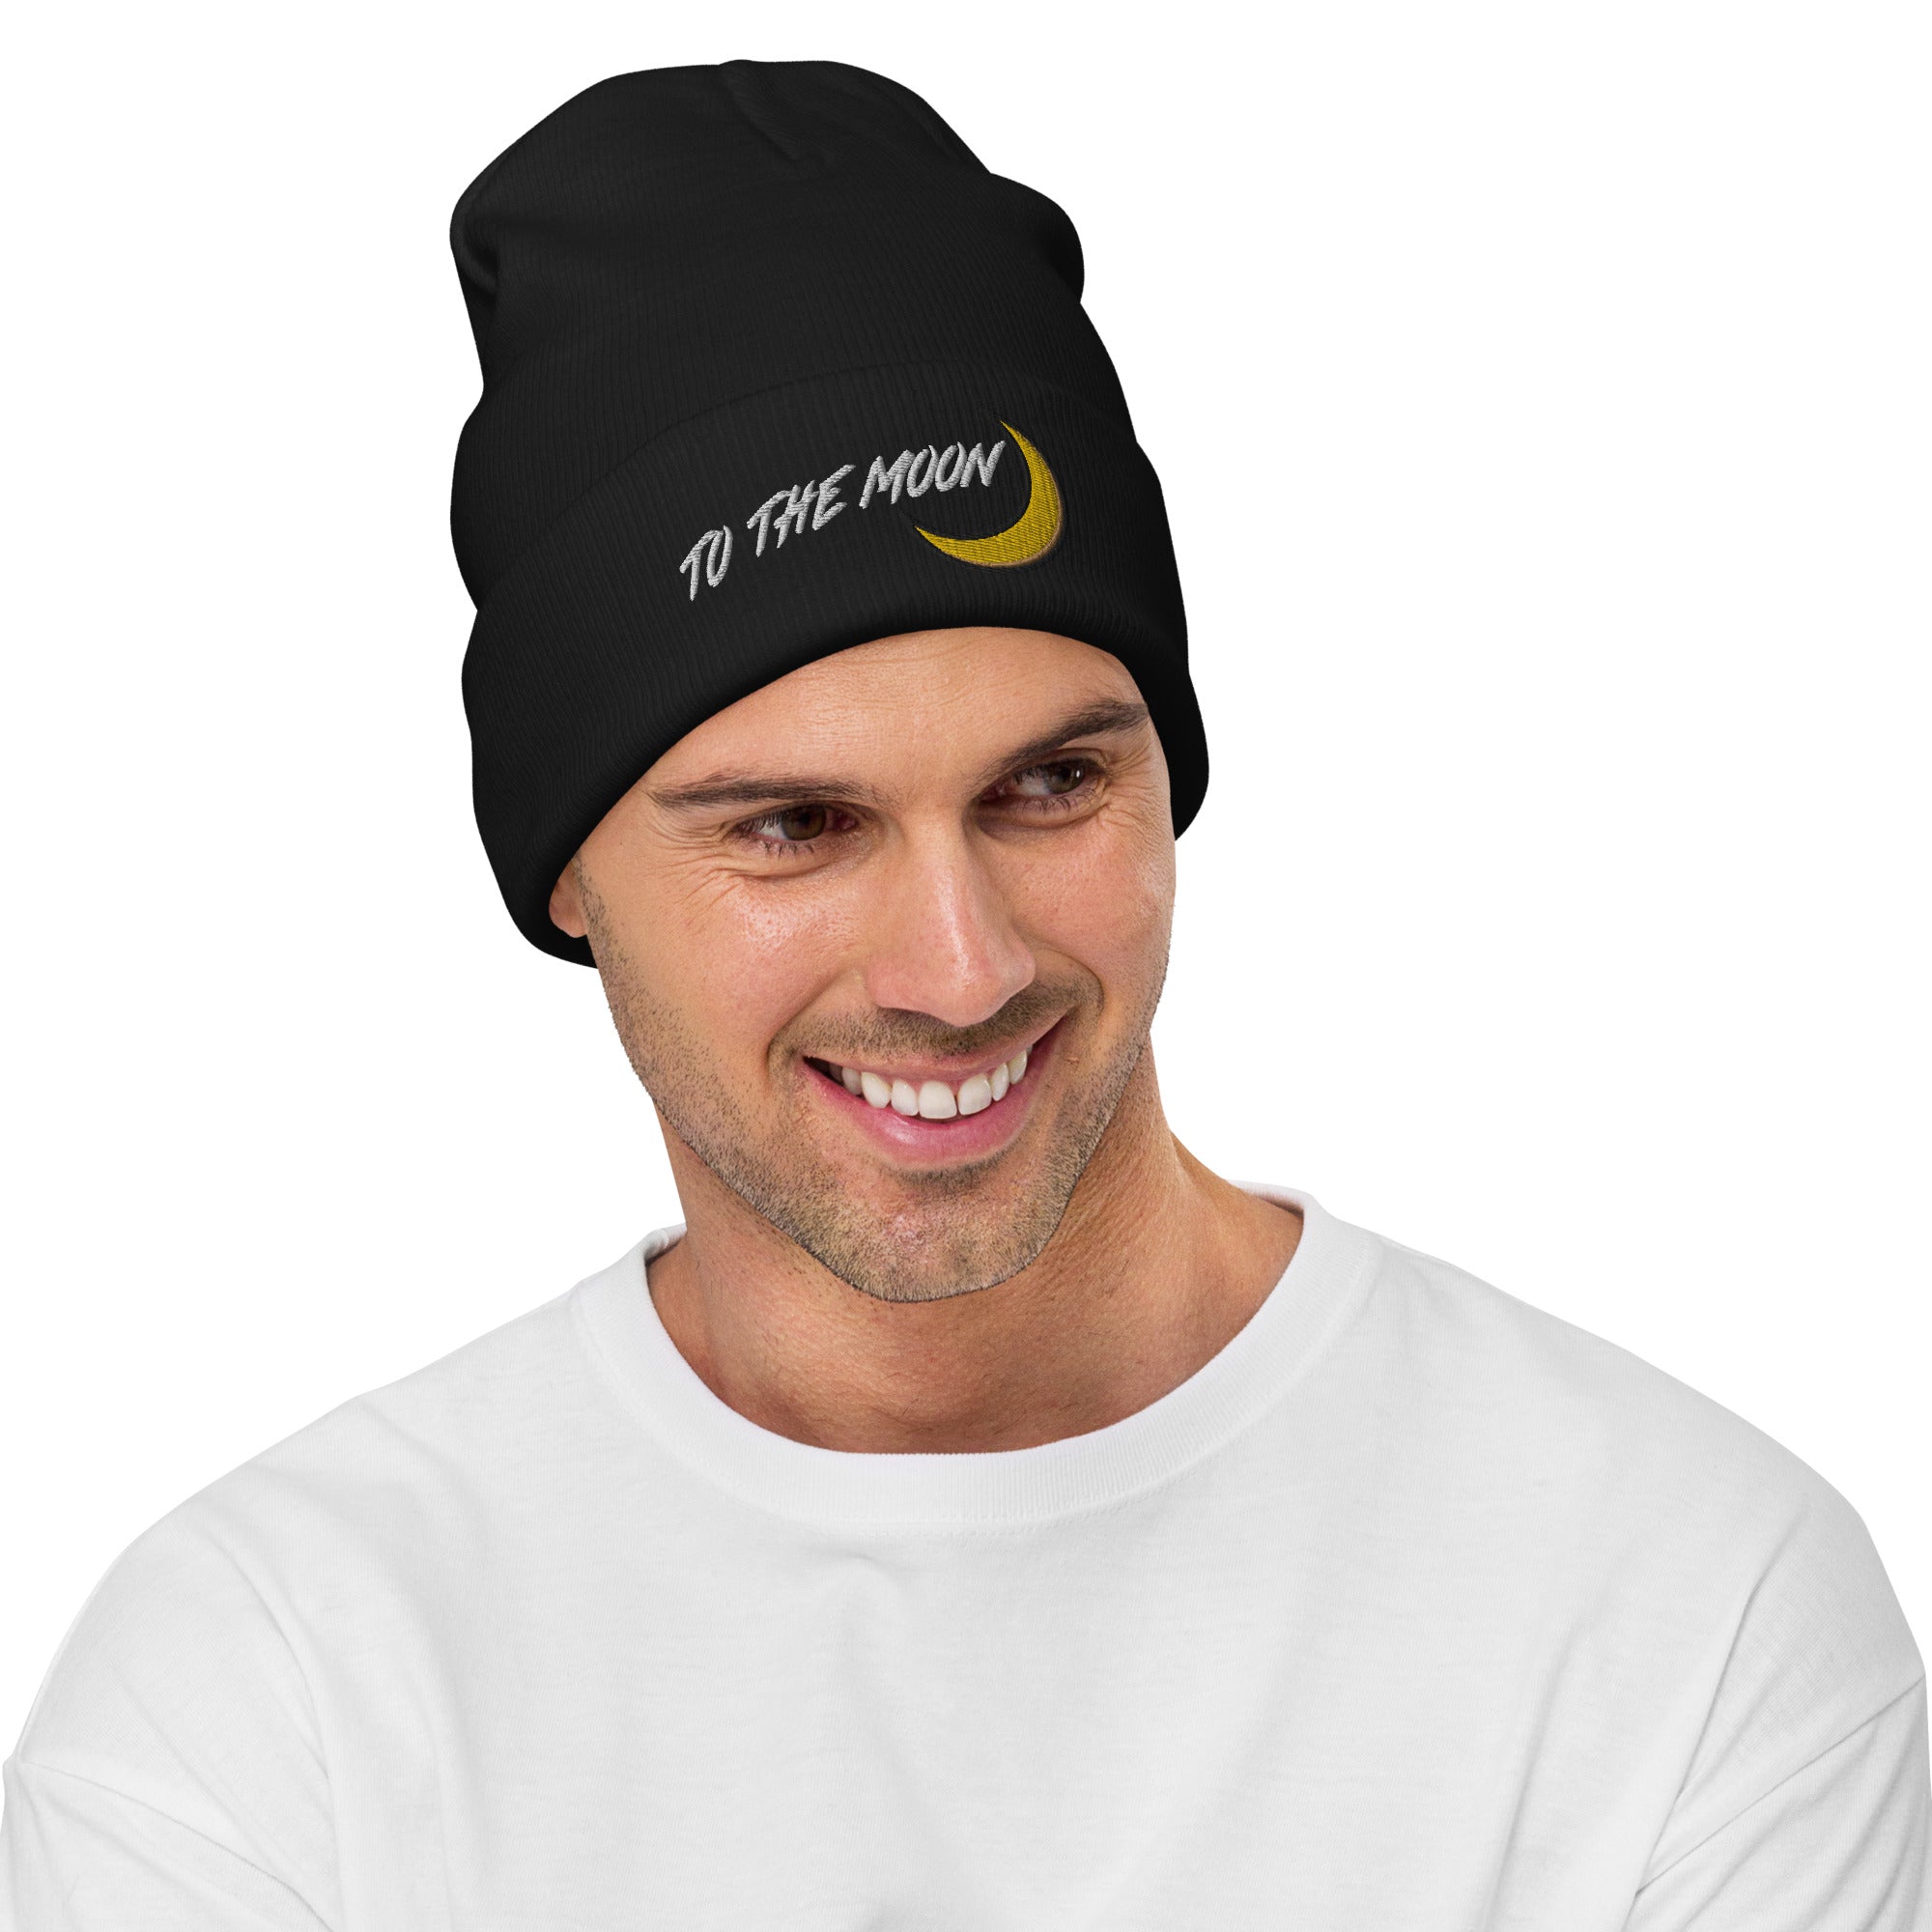 To The Moon Crypto Tokens Coins NFT Embroidered Cuff Beanie Cap